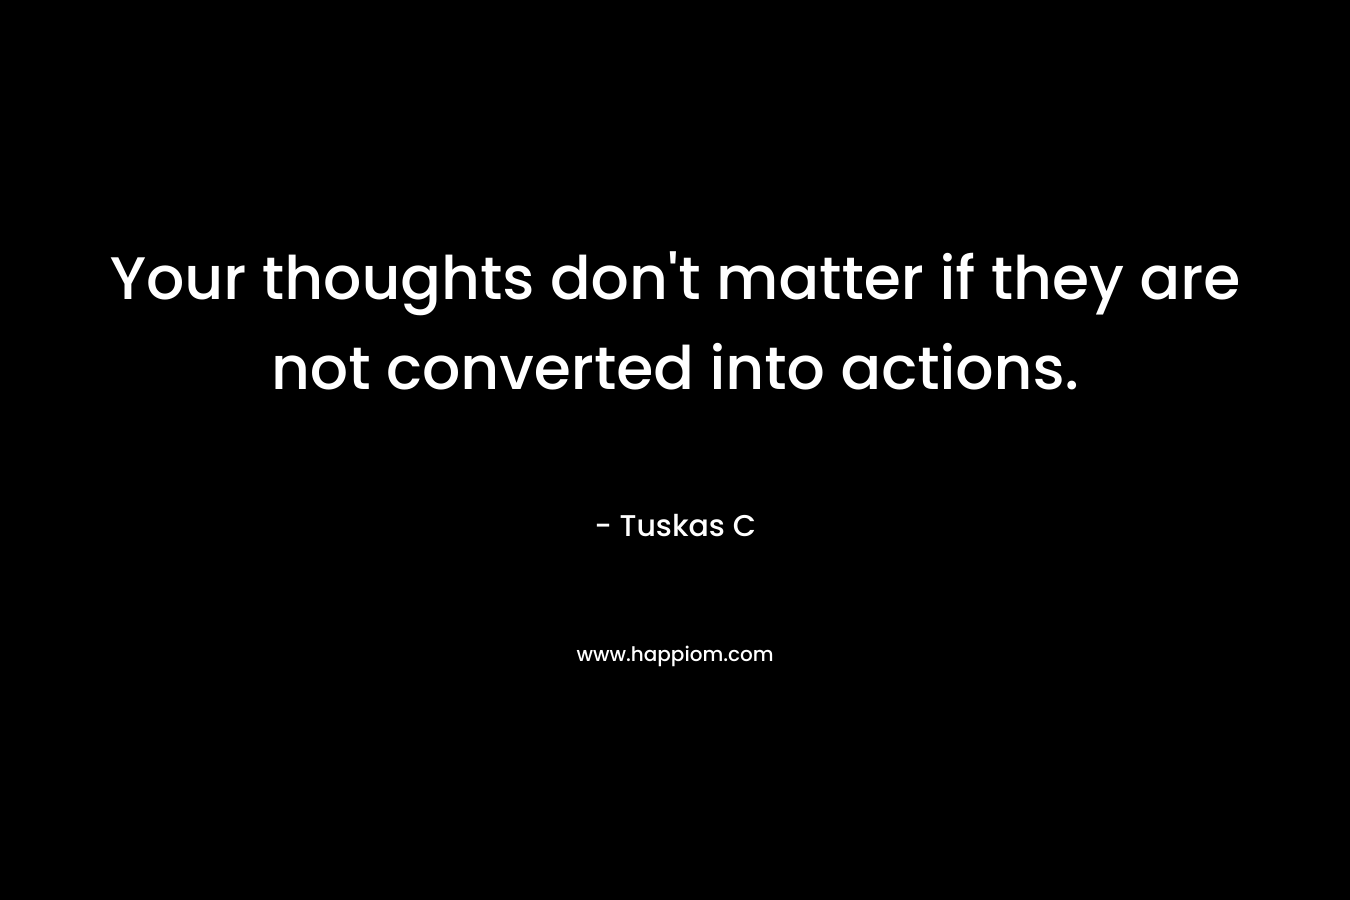 Your thoughts don't matter if they are not converted into actions.